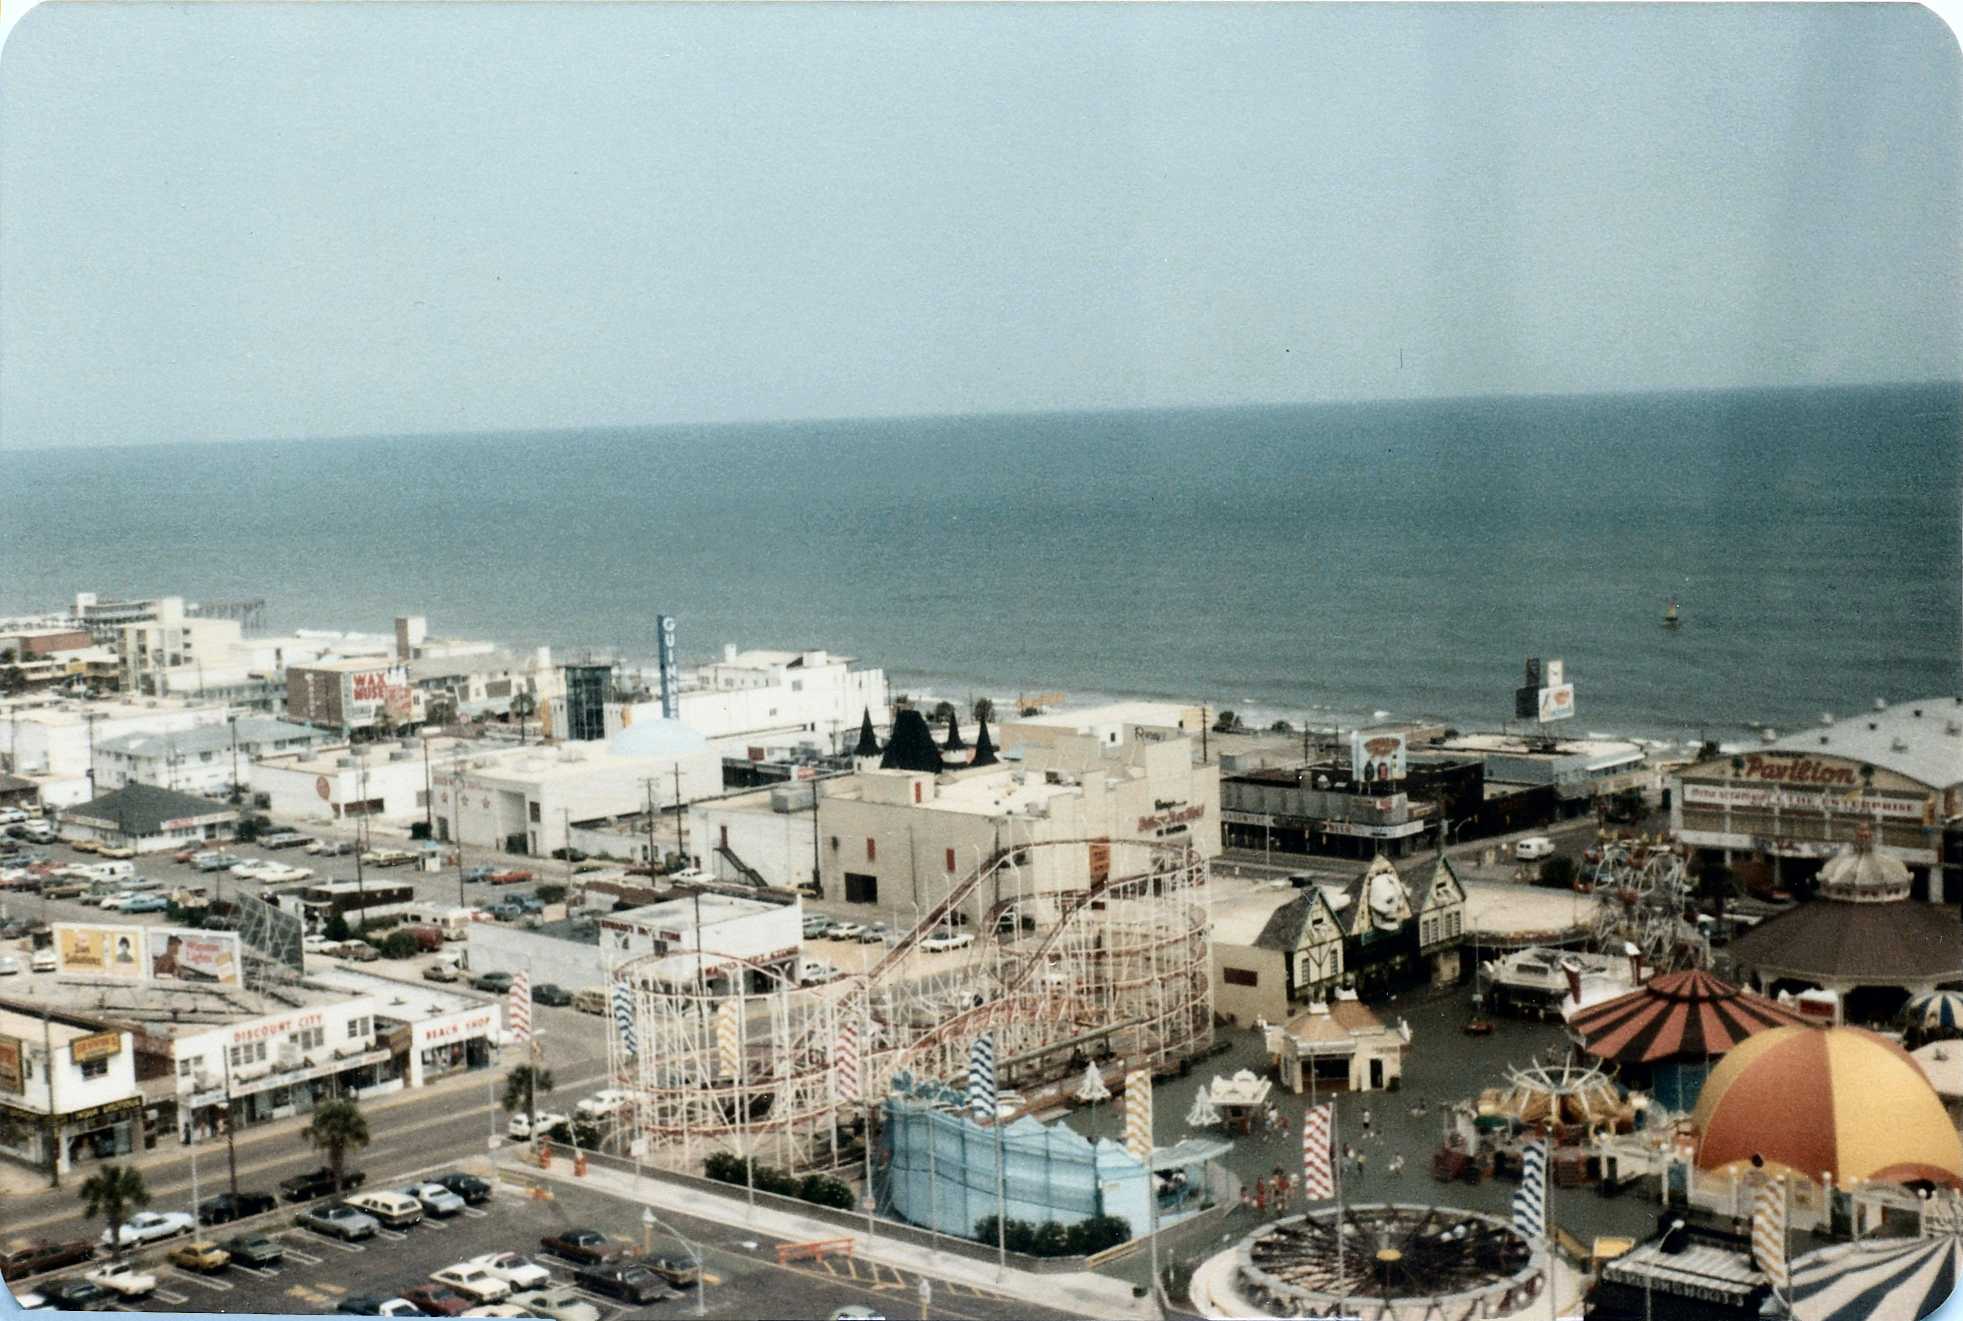 Pavilion in the 1980s